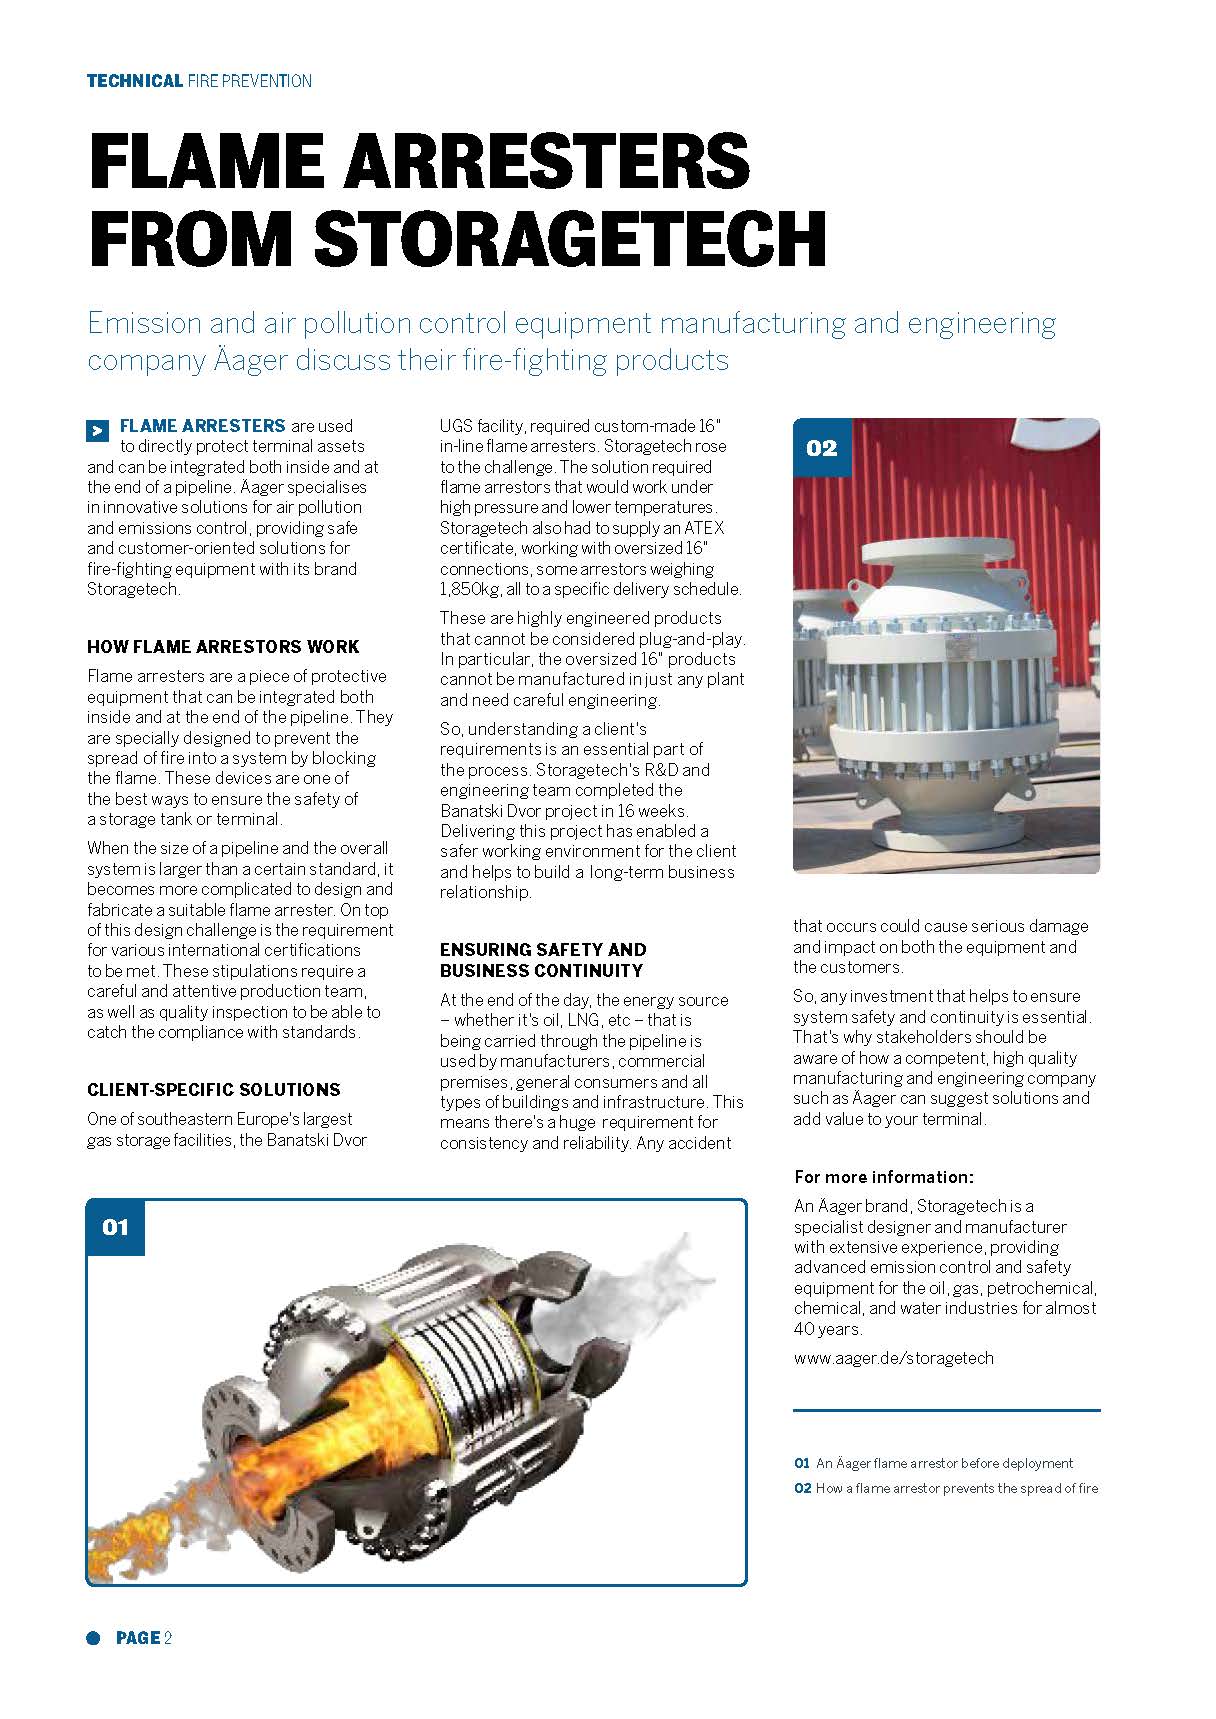 Customer-Oriented Flame Arresters from Storagetech – Tank Storage Magazine Article 59